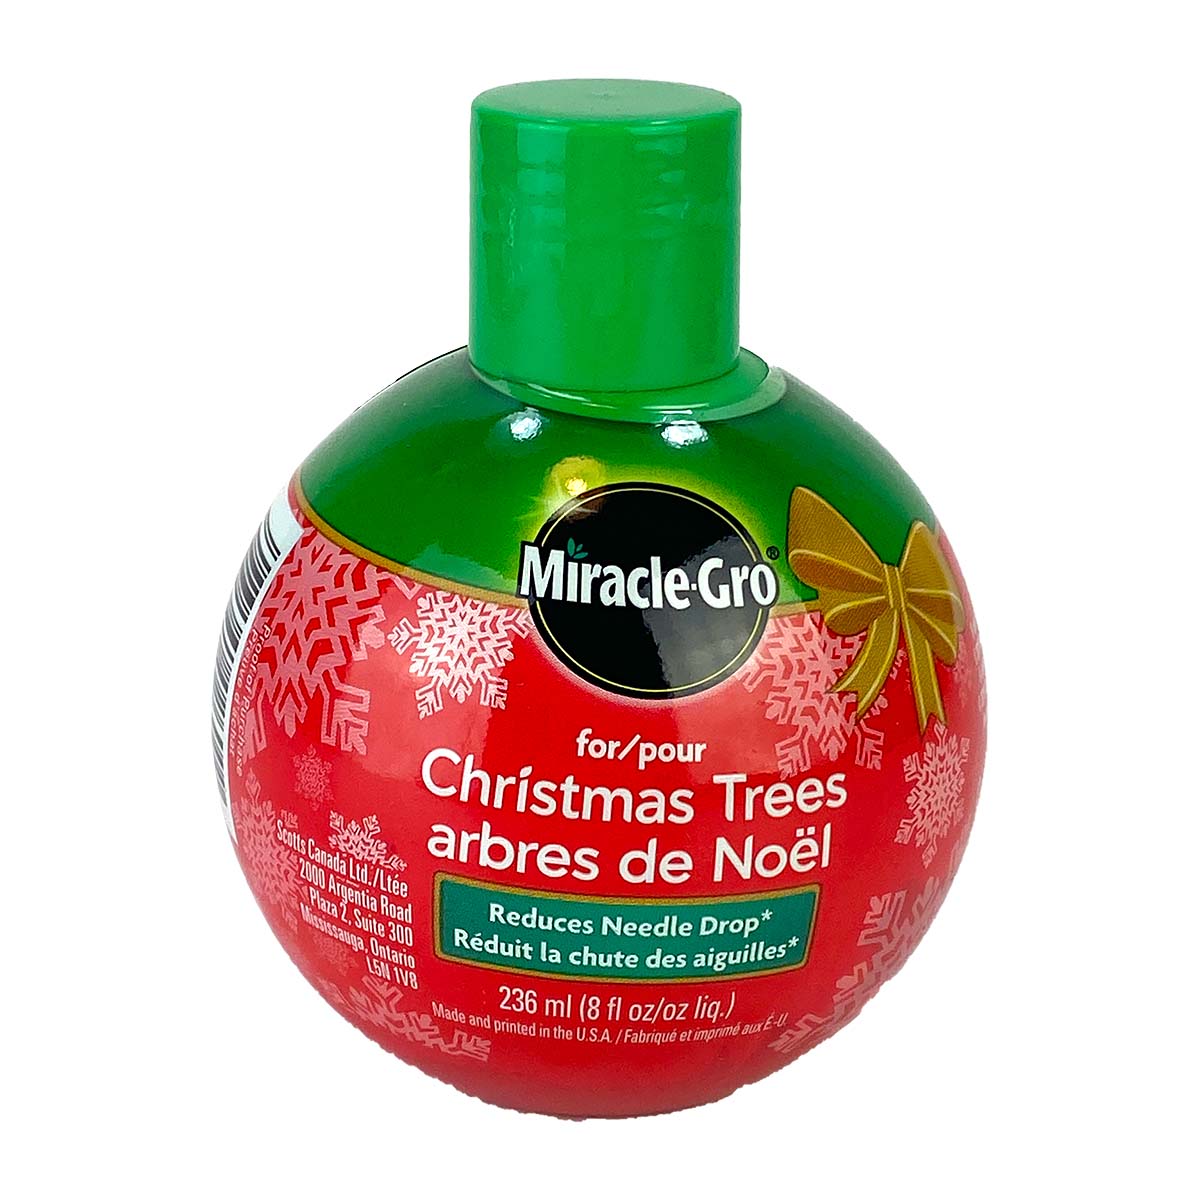 Miracle Gro for Christmas Trees